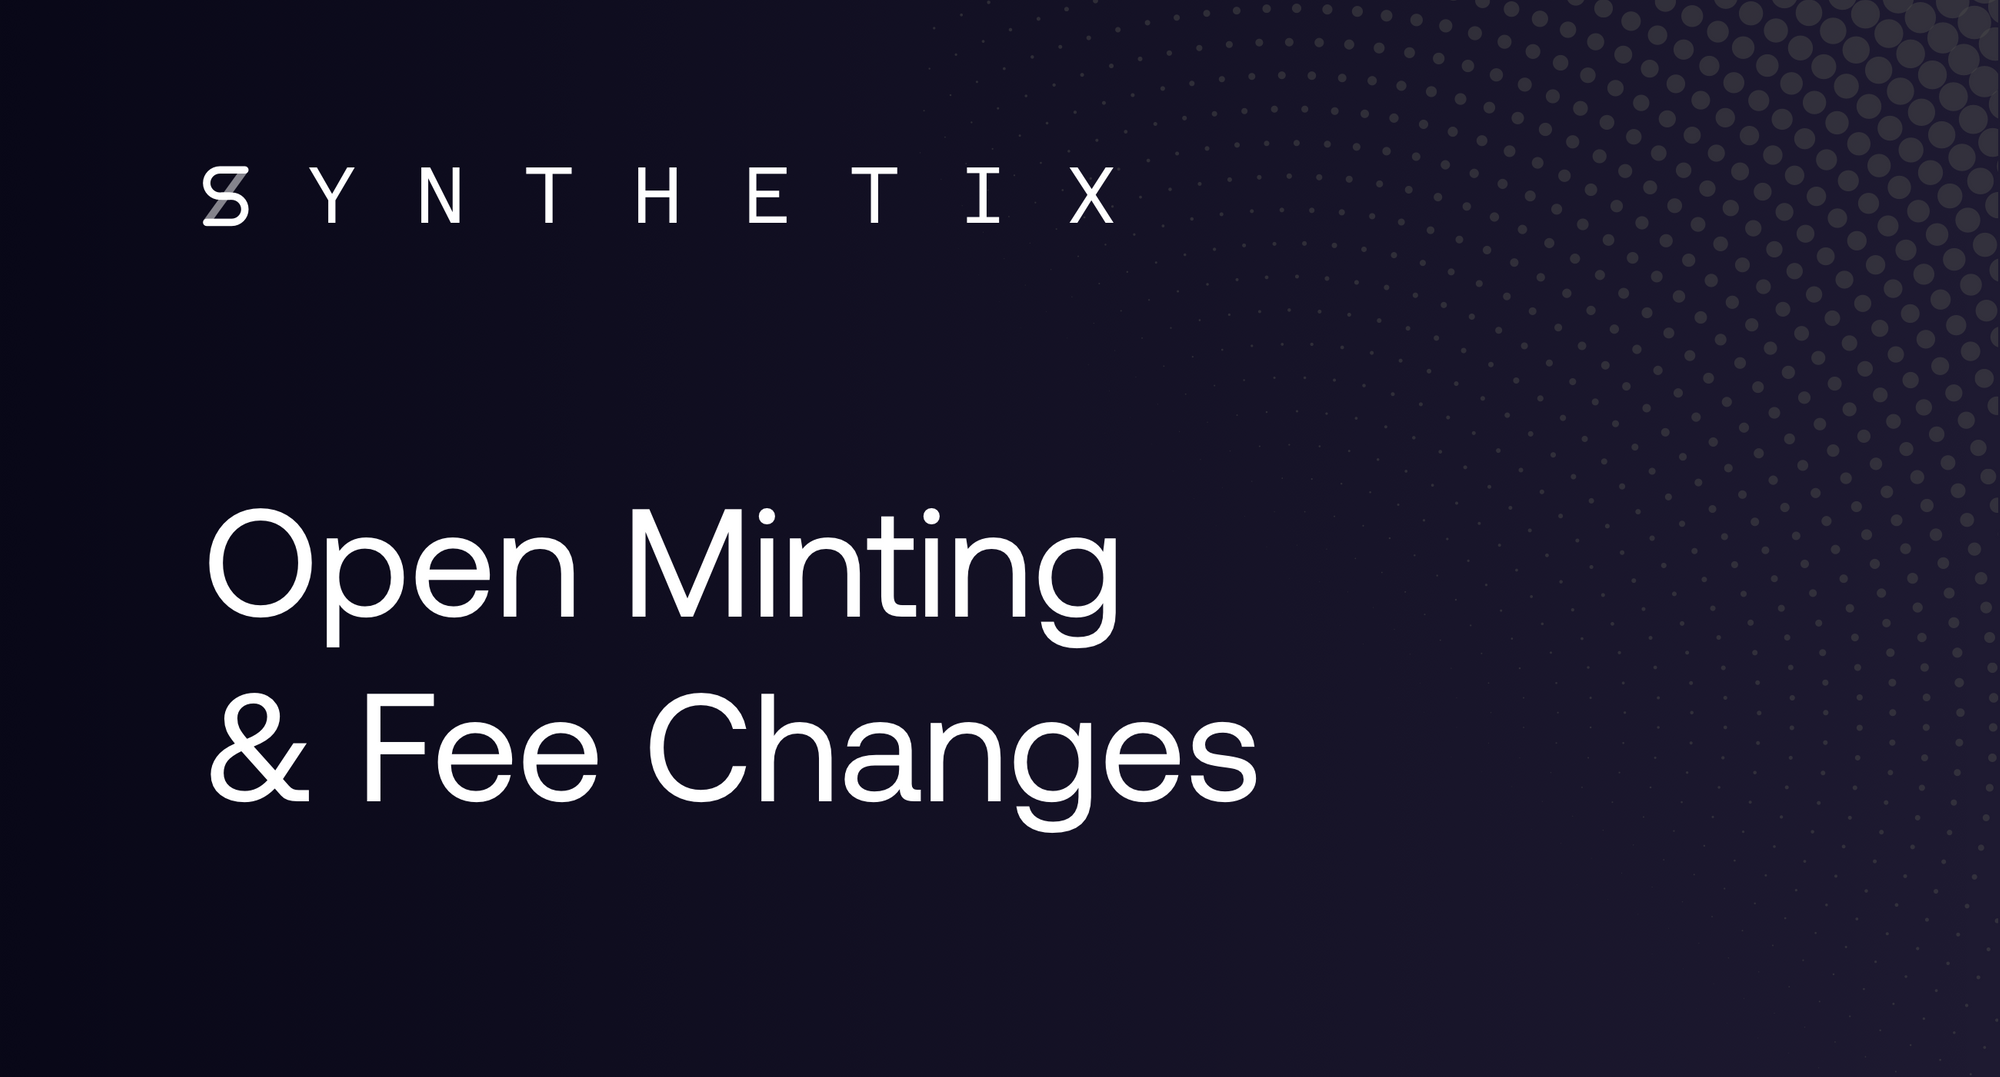 Launch: Open Minting & Fee Changes